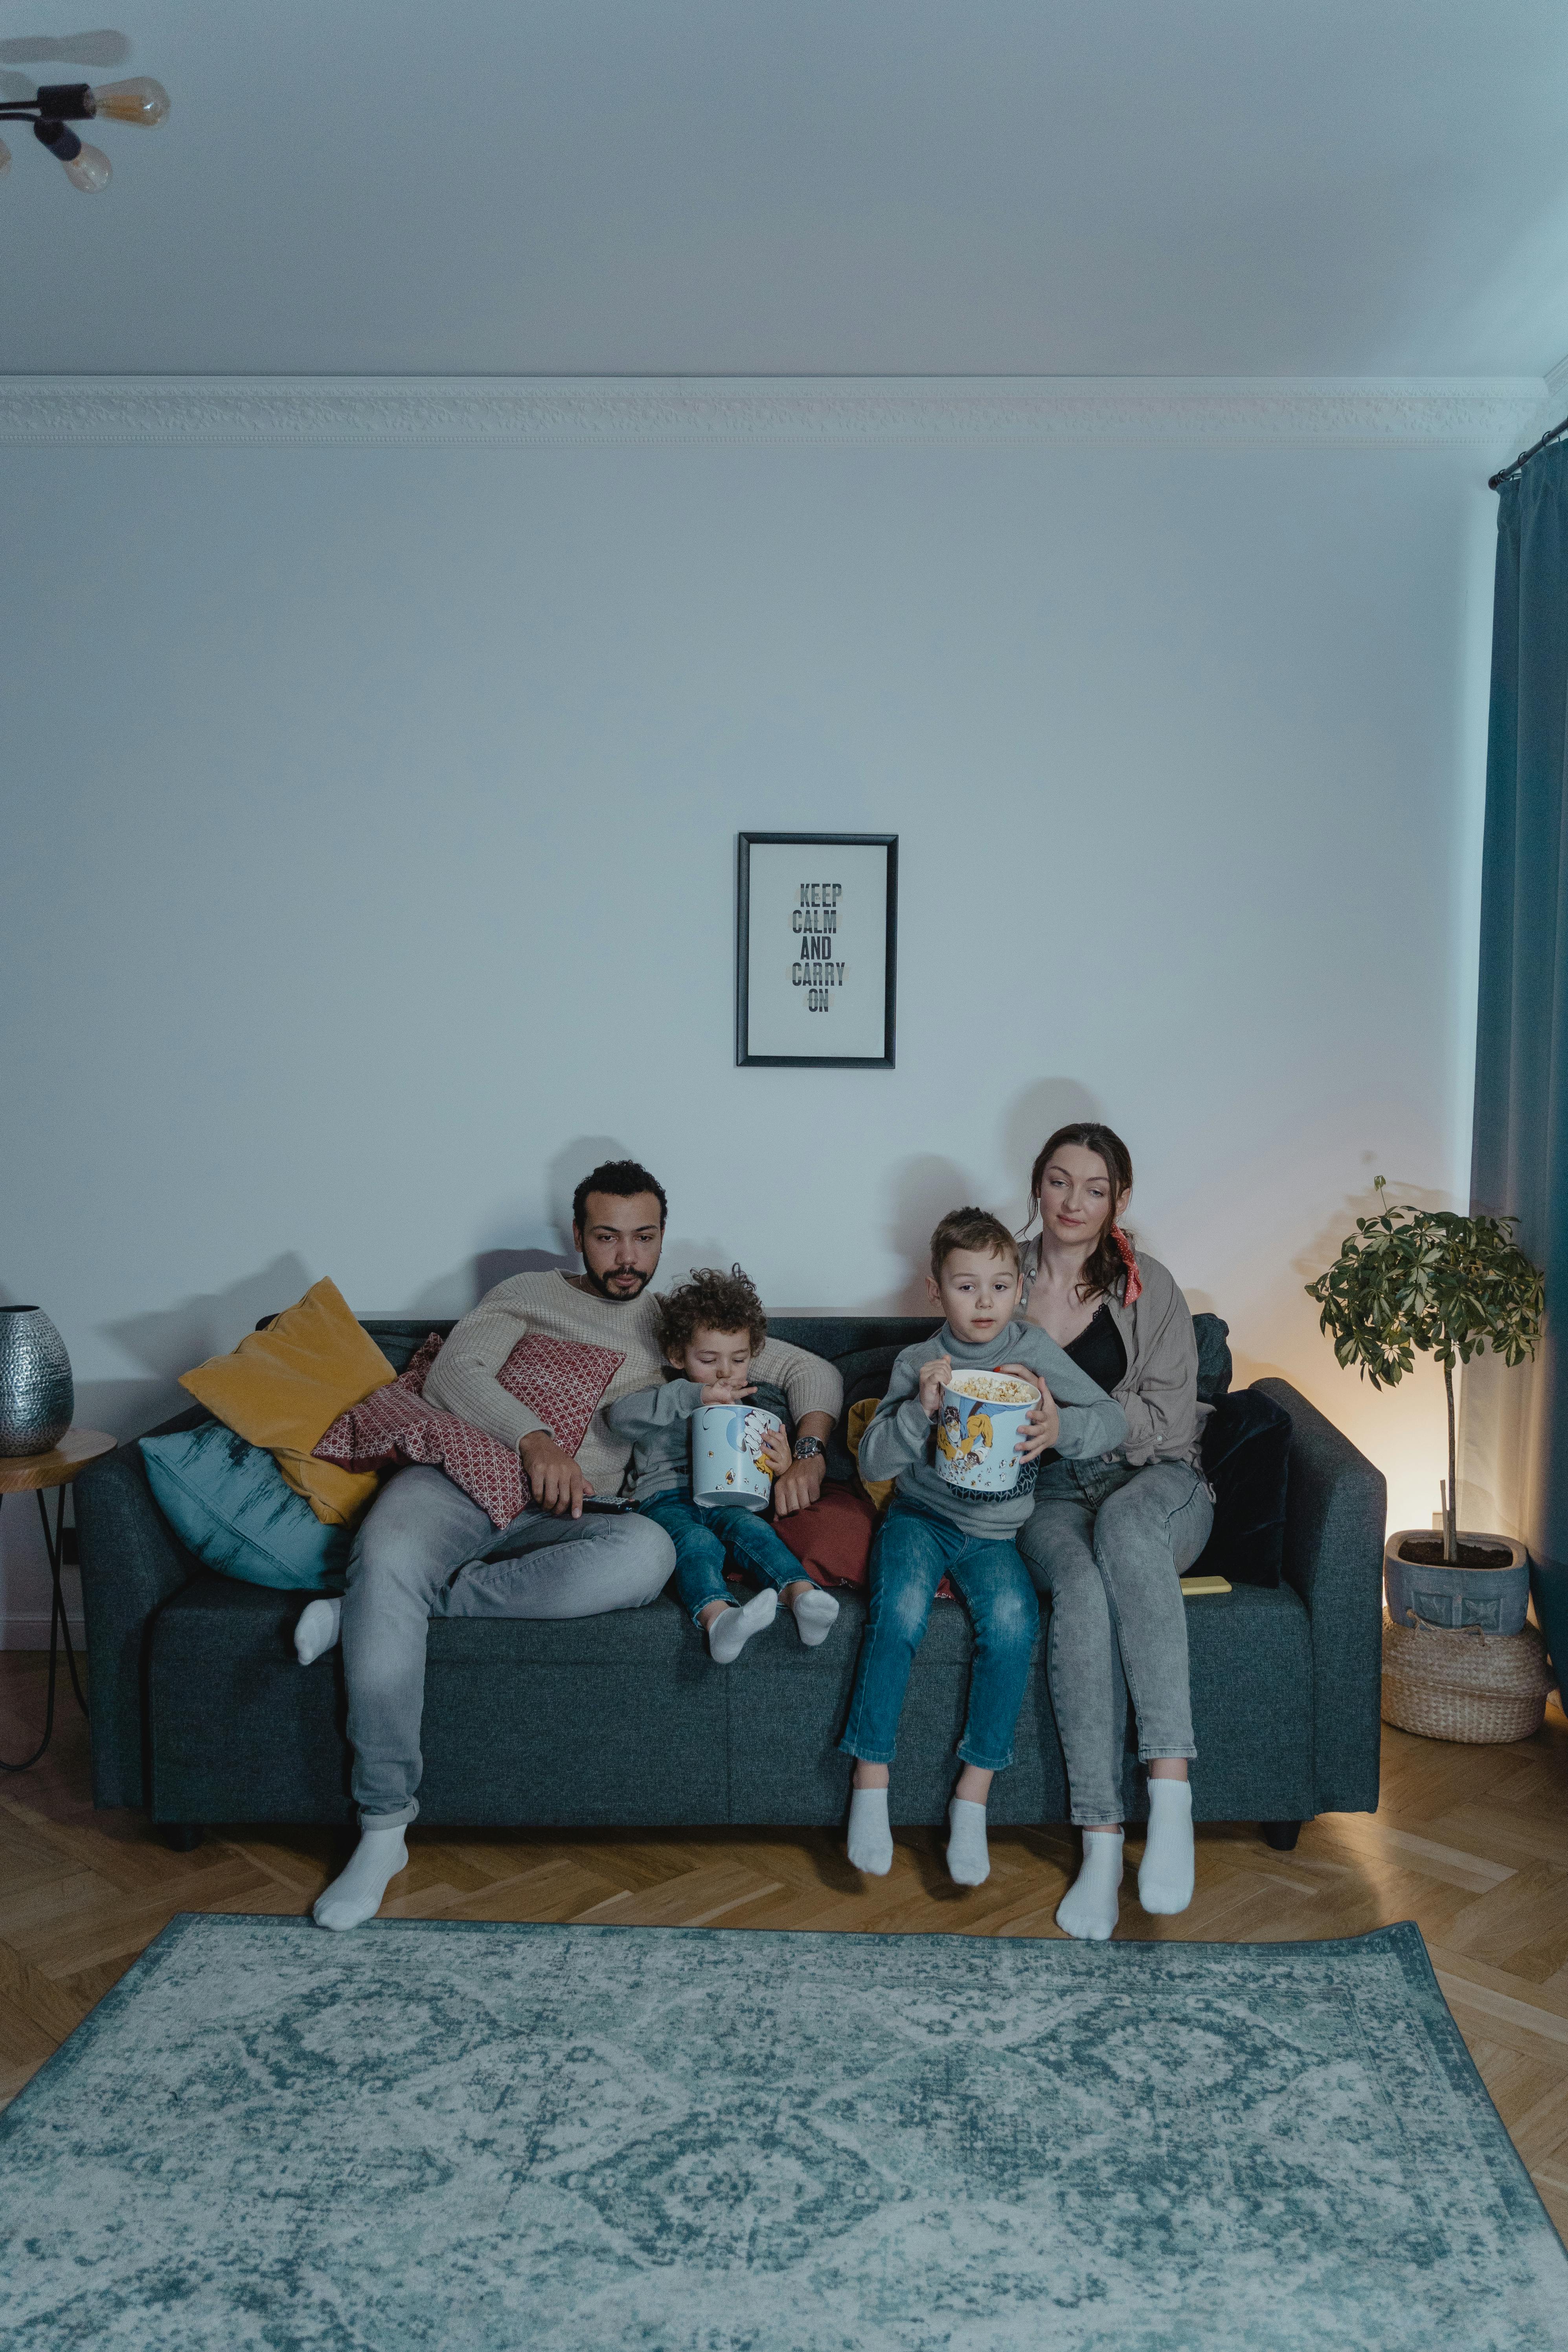 A couple sitting on the couch with their kids  | Source: Pexels